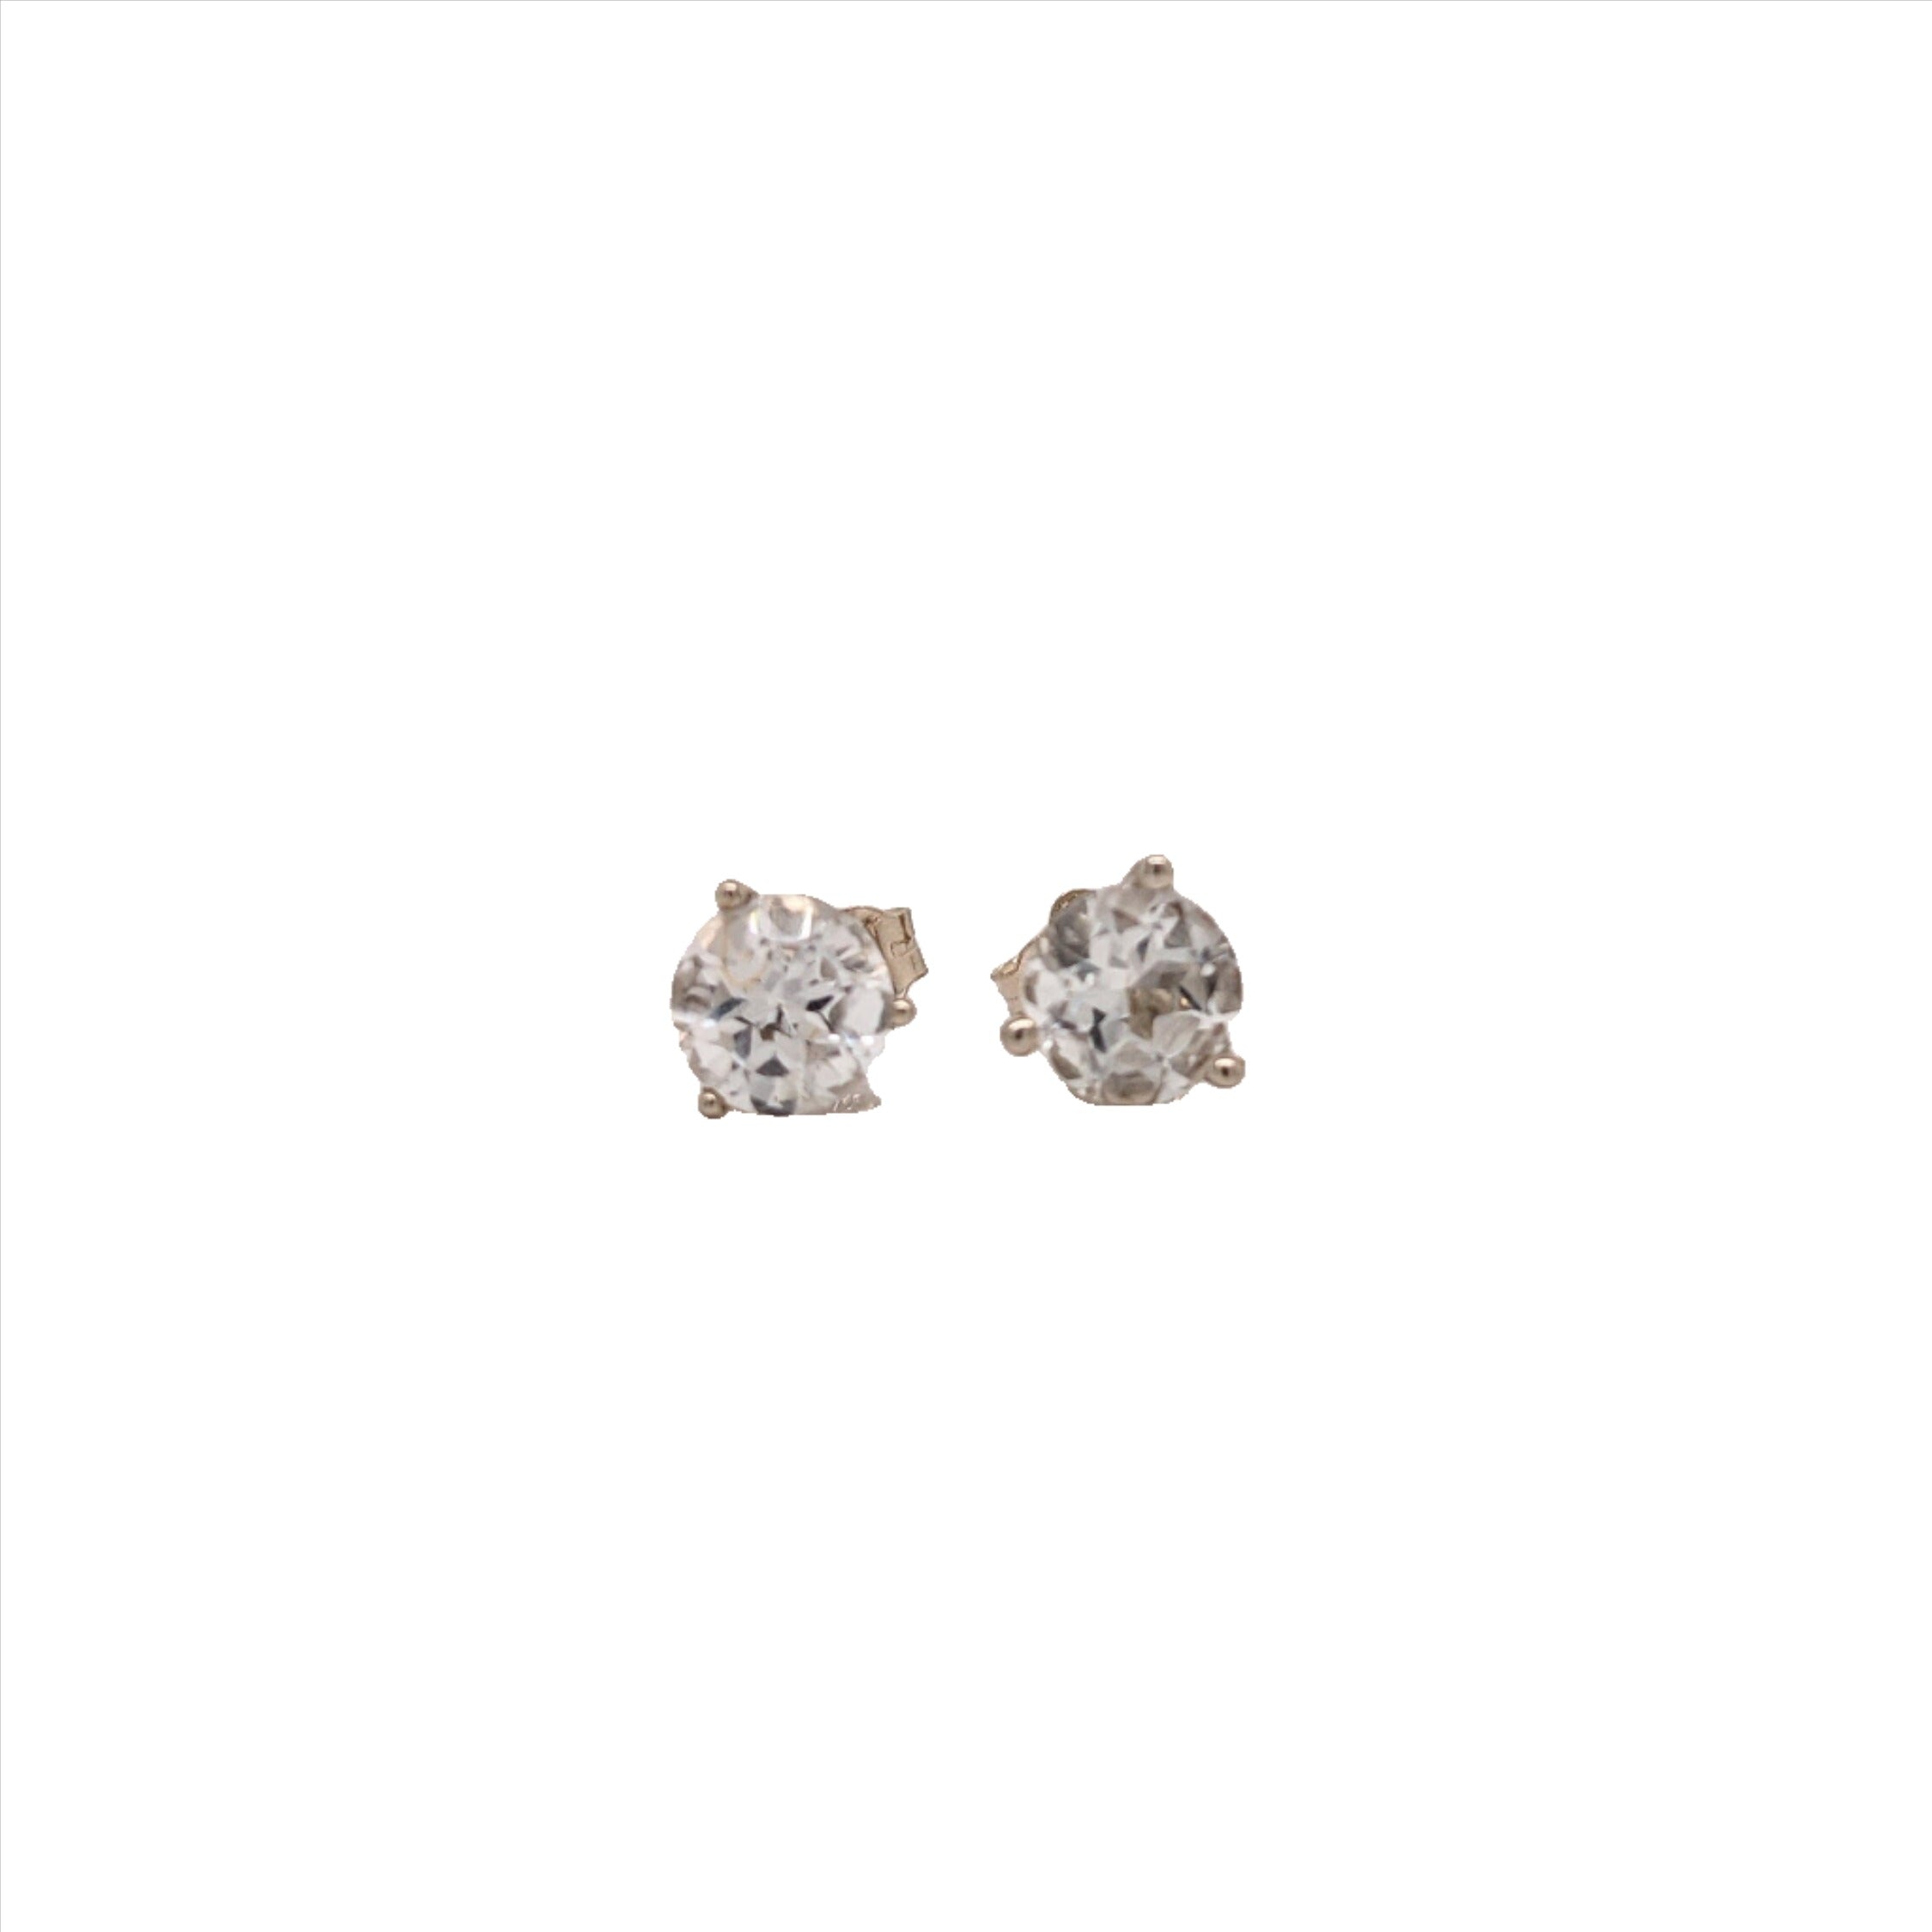 Classy White Topaz Studs in Solid 14K White, Yellow or Rose Gold | Round 5mm 7mm | Martini 3 Prong | Minimalist | Gemstone Earrings